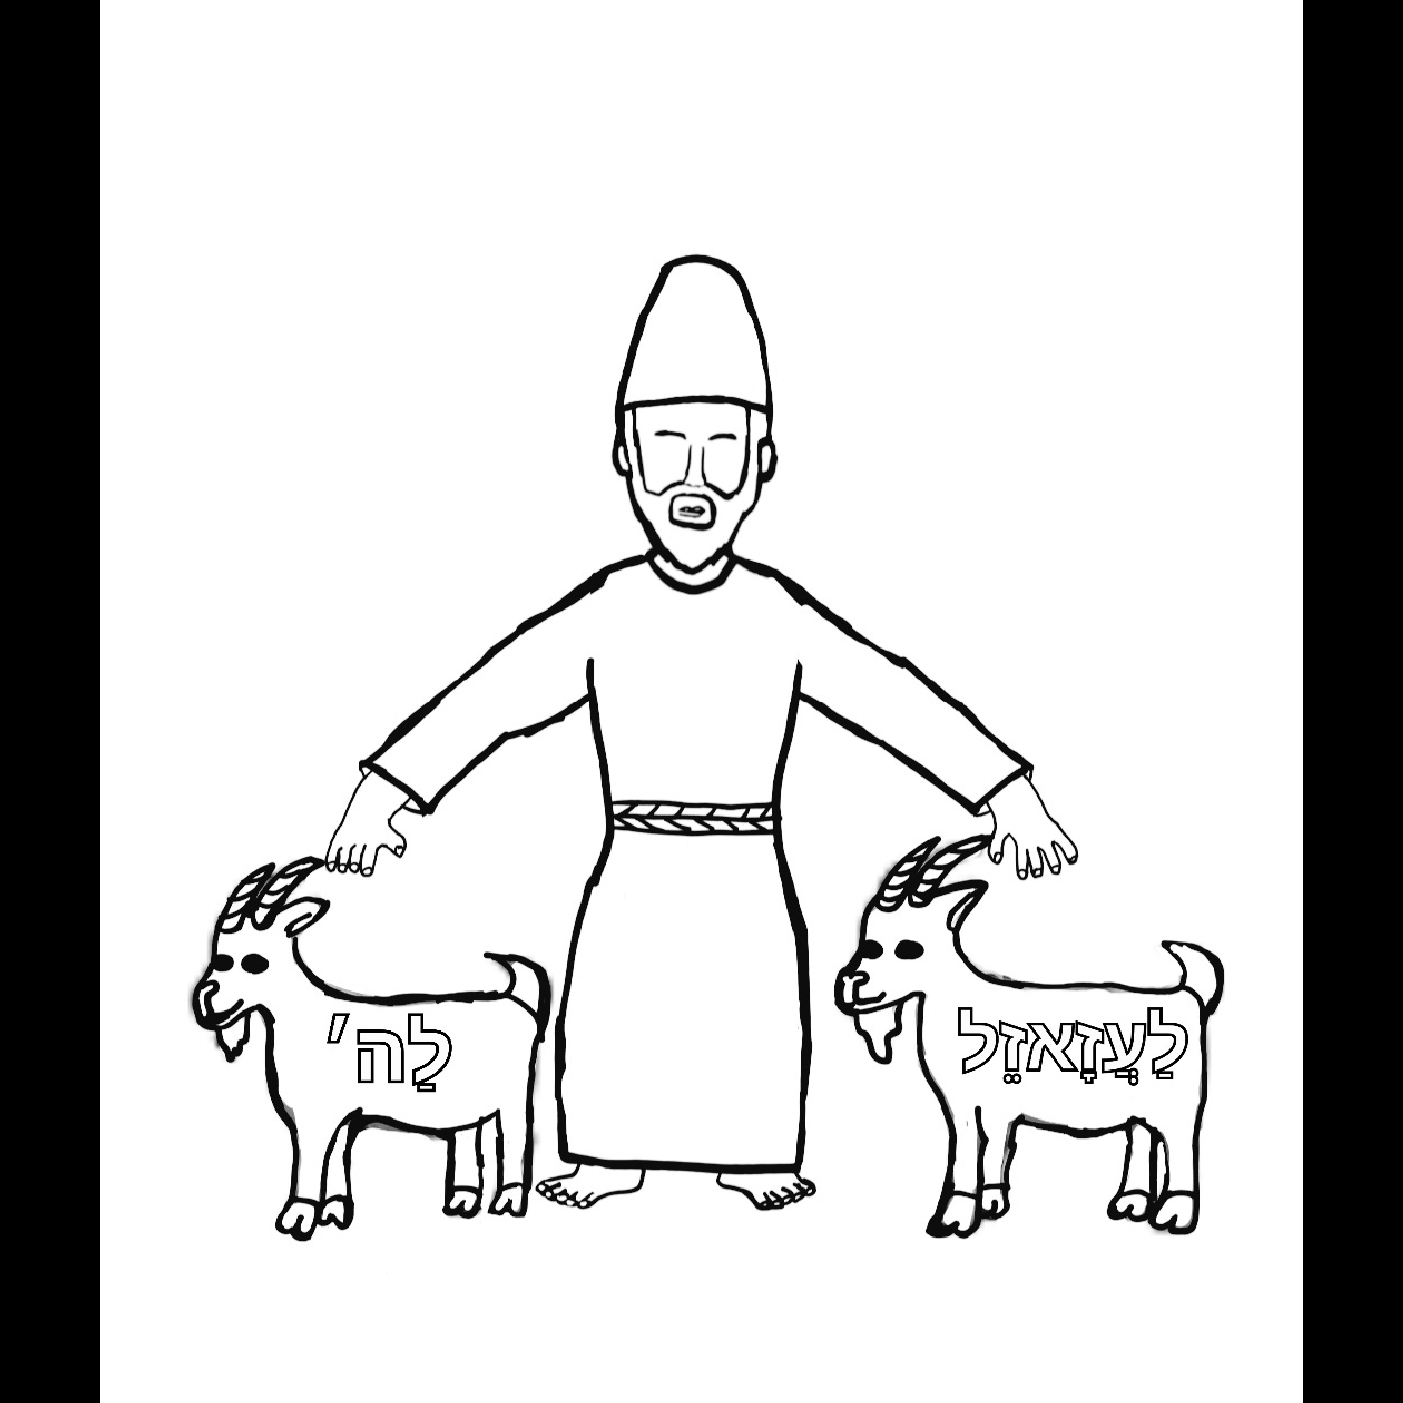 Mussar Minutes - Acharei Mos: What Does Scapegoat Really Mean? 🐐